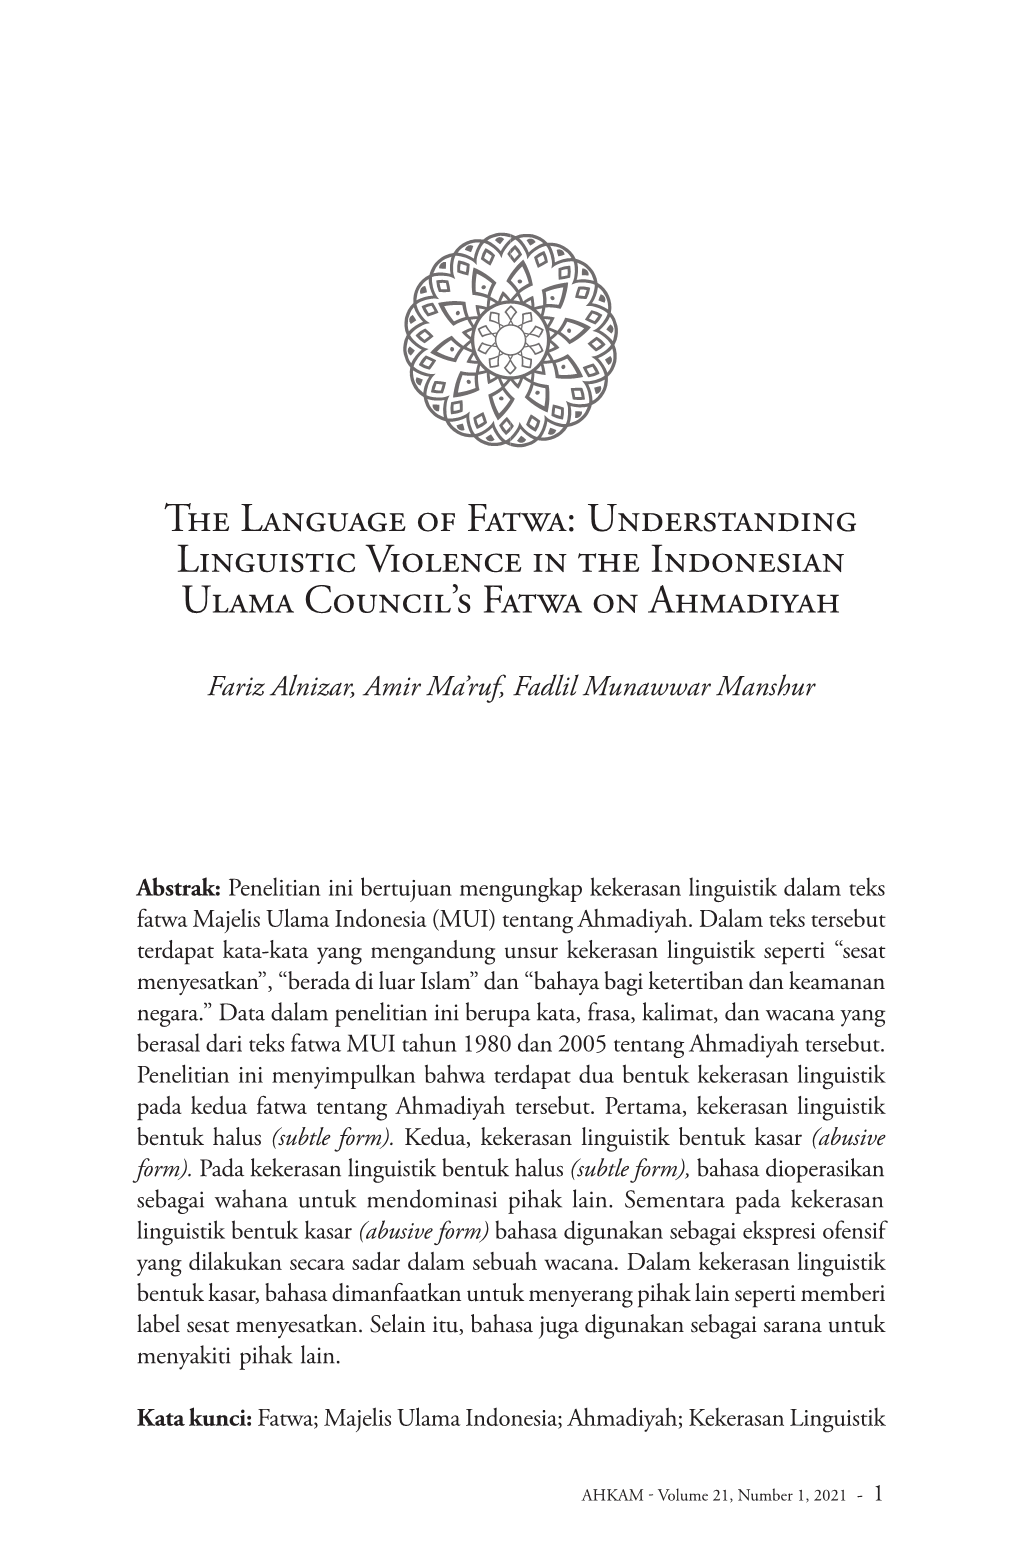 Understanding Linguistic Violence in the Indonesian Ulama Council's